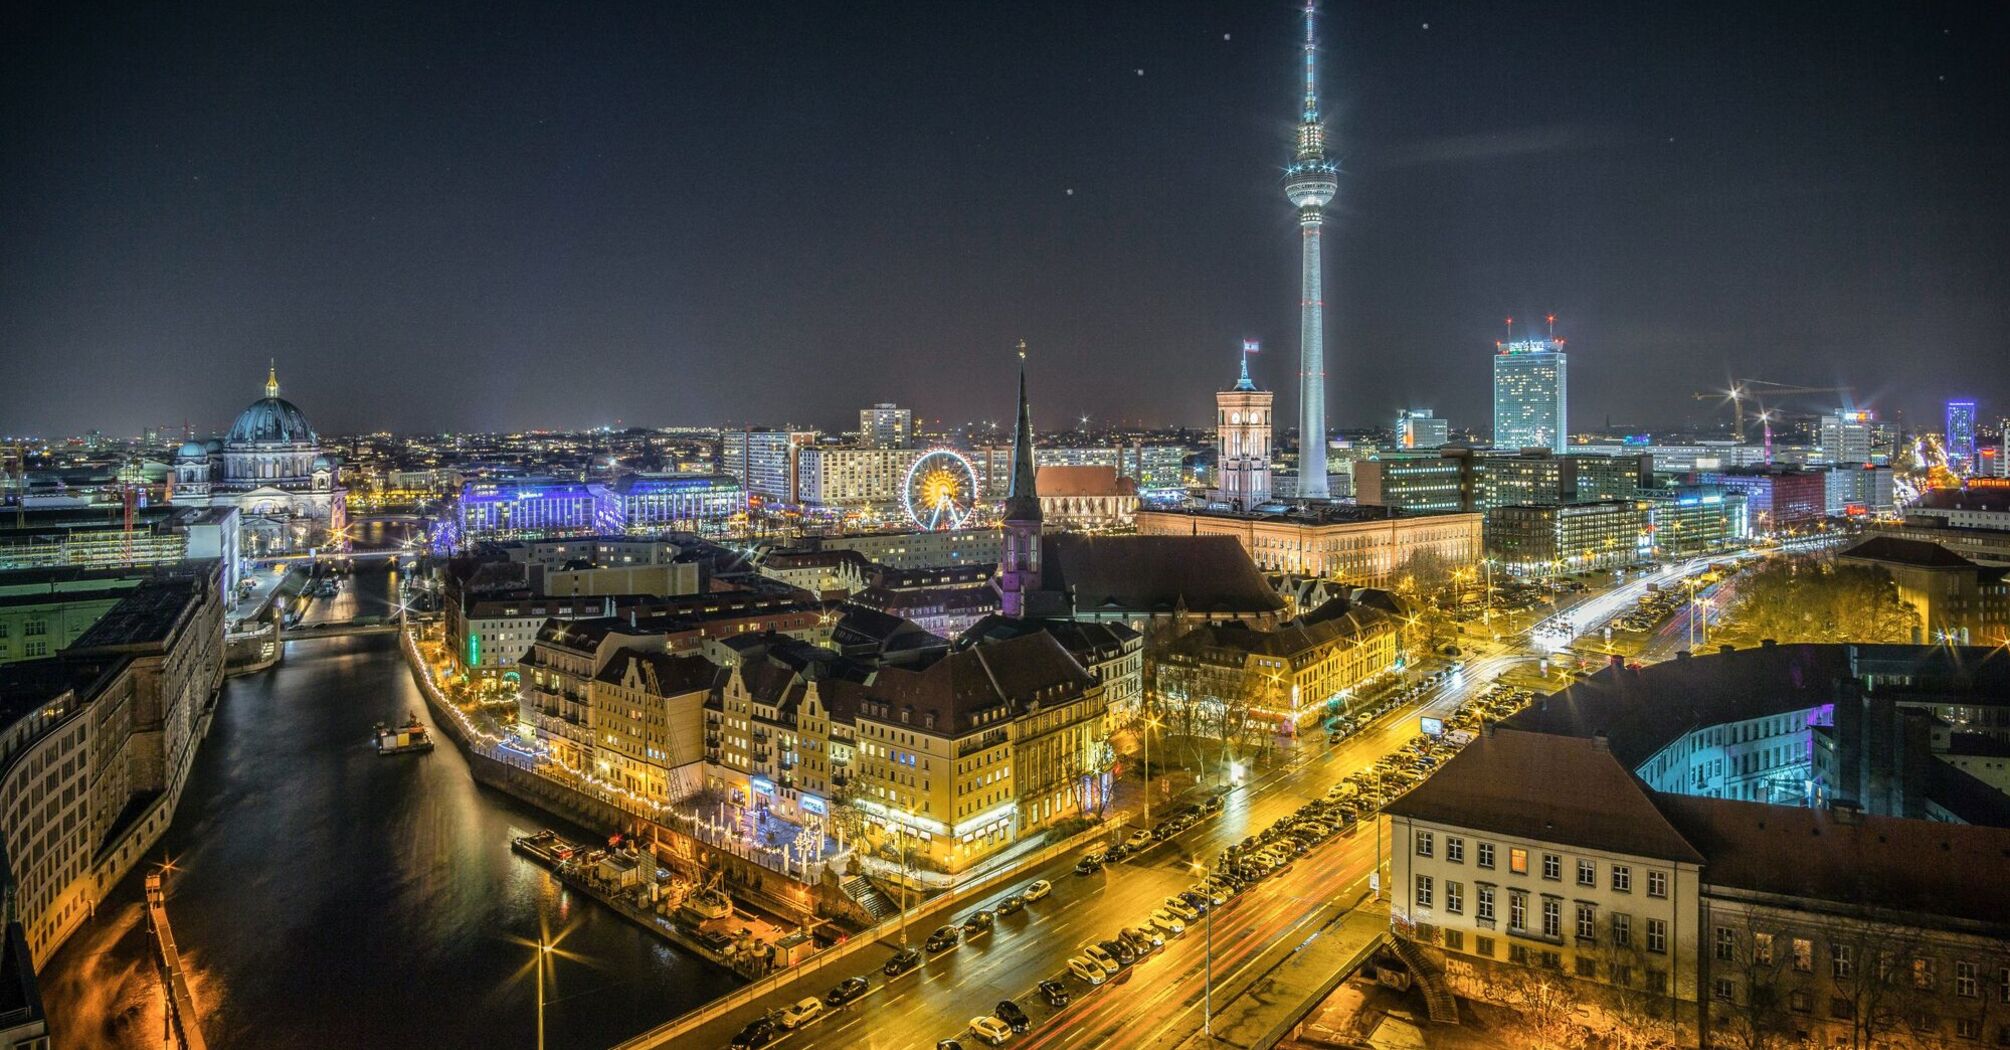 A night-time panoramic view of Berlin with the illuminated TV Tower in the backdrop, adjacent buildings, the Spree river, and busy streets with streaks of vehicle lights